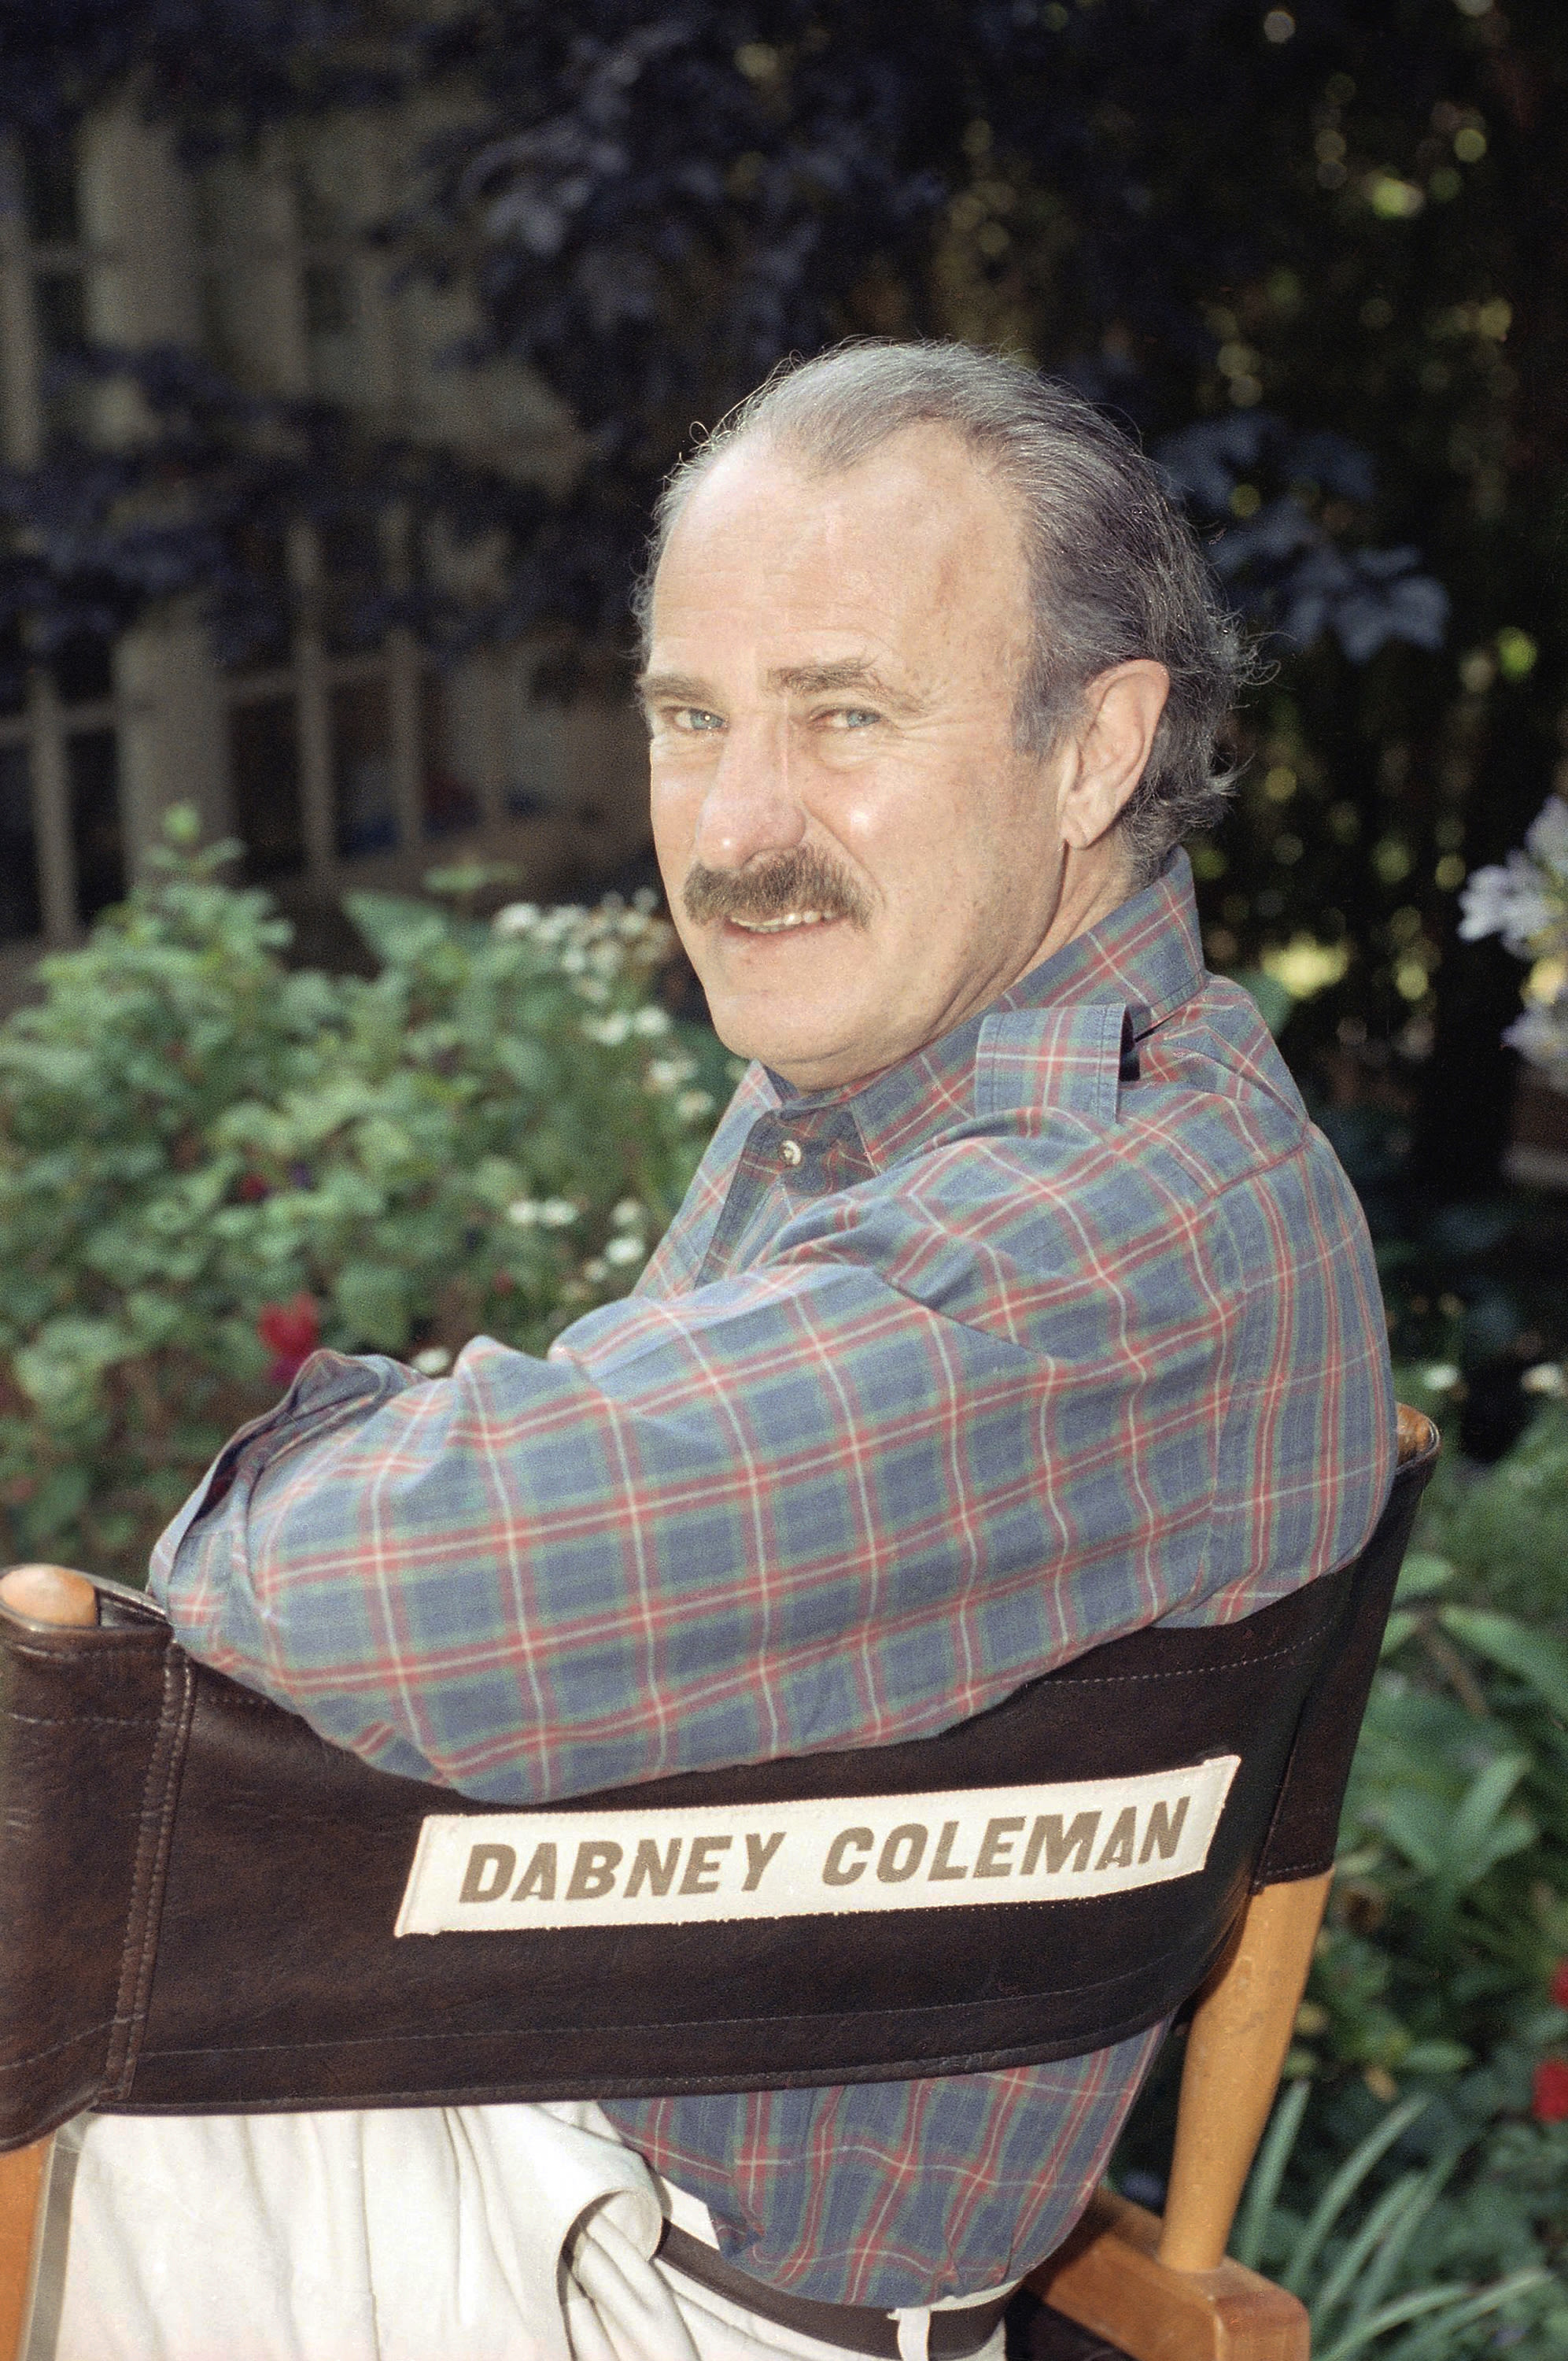 Dabney Coleman, the bad boss of '9 to 5' and 'Yellowstone' guest star, dies at 92